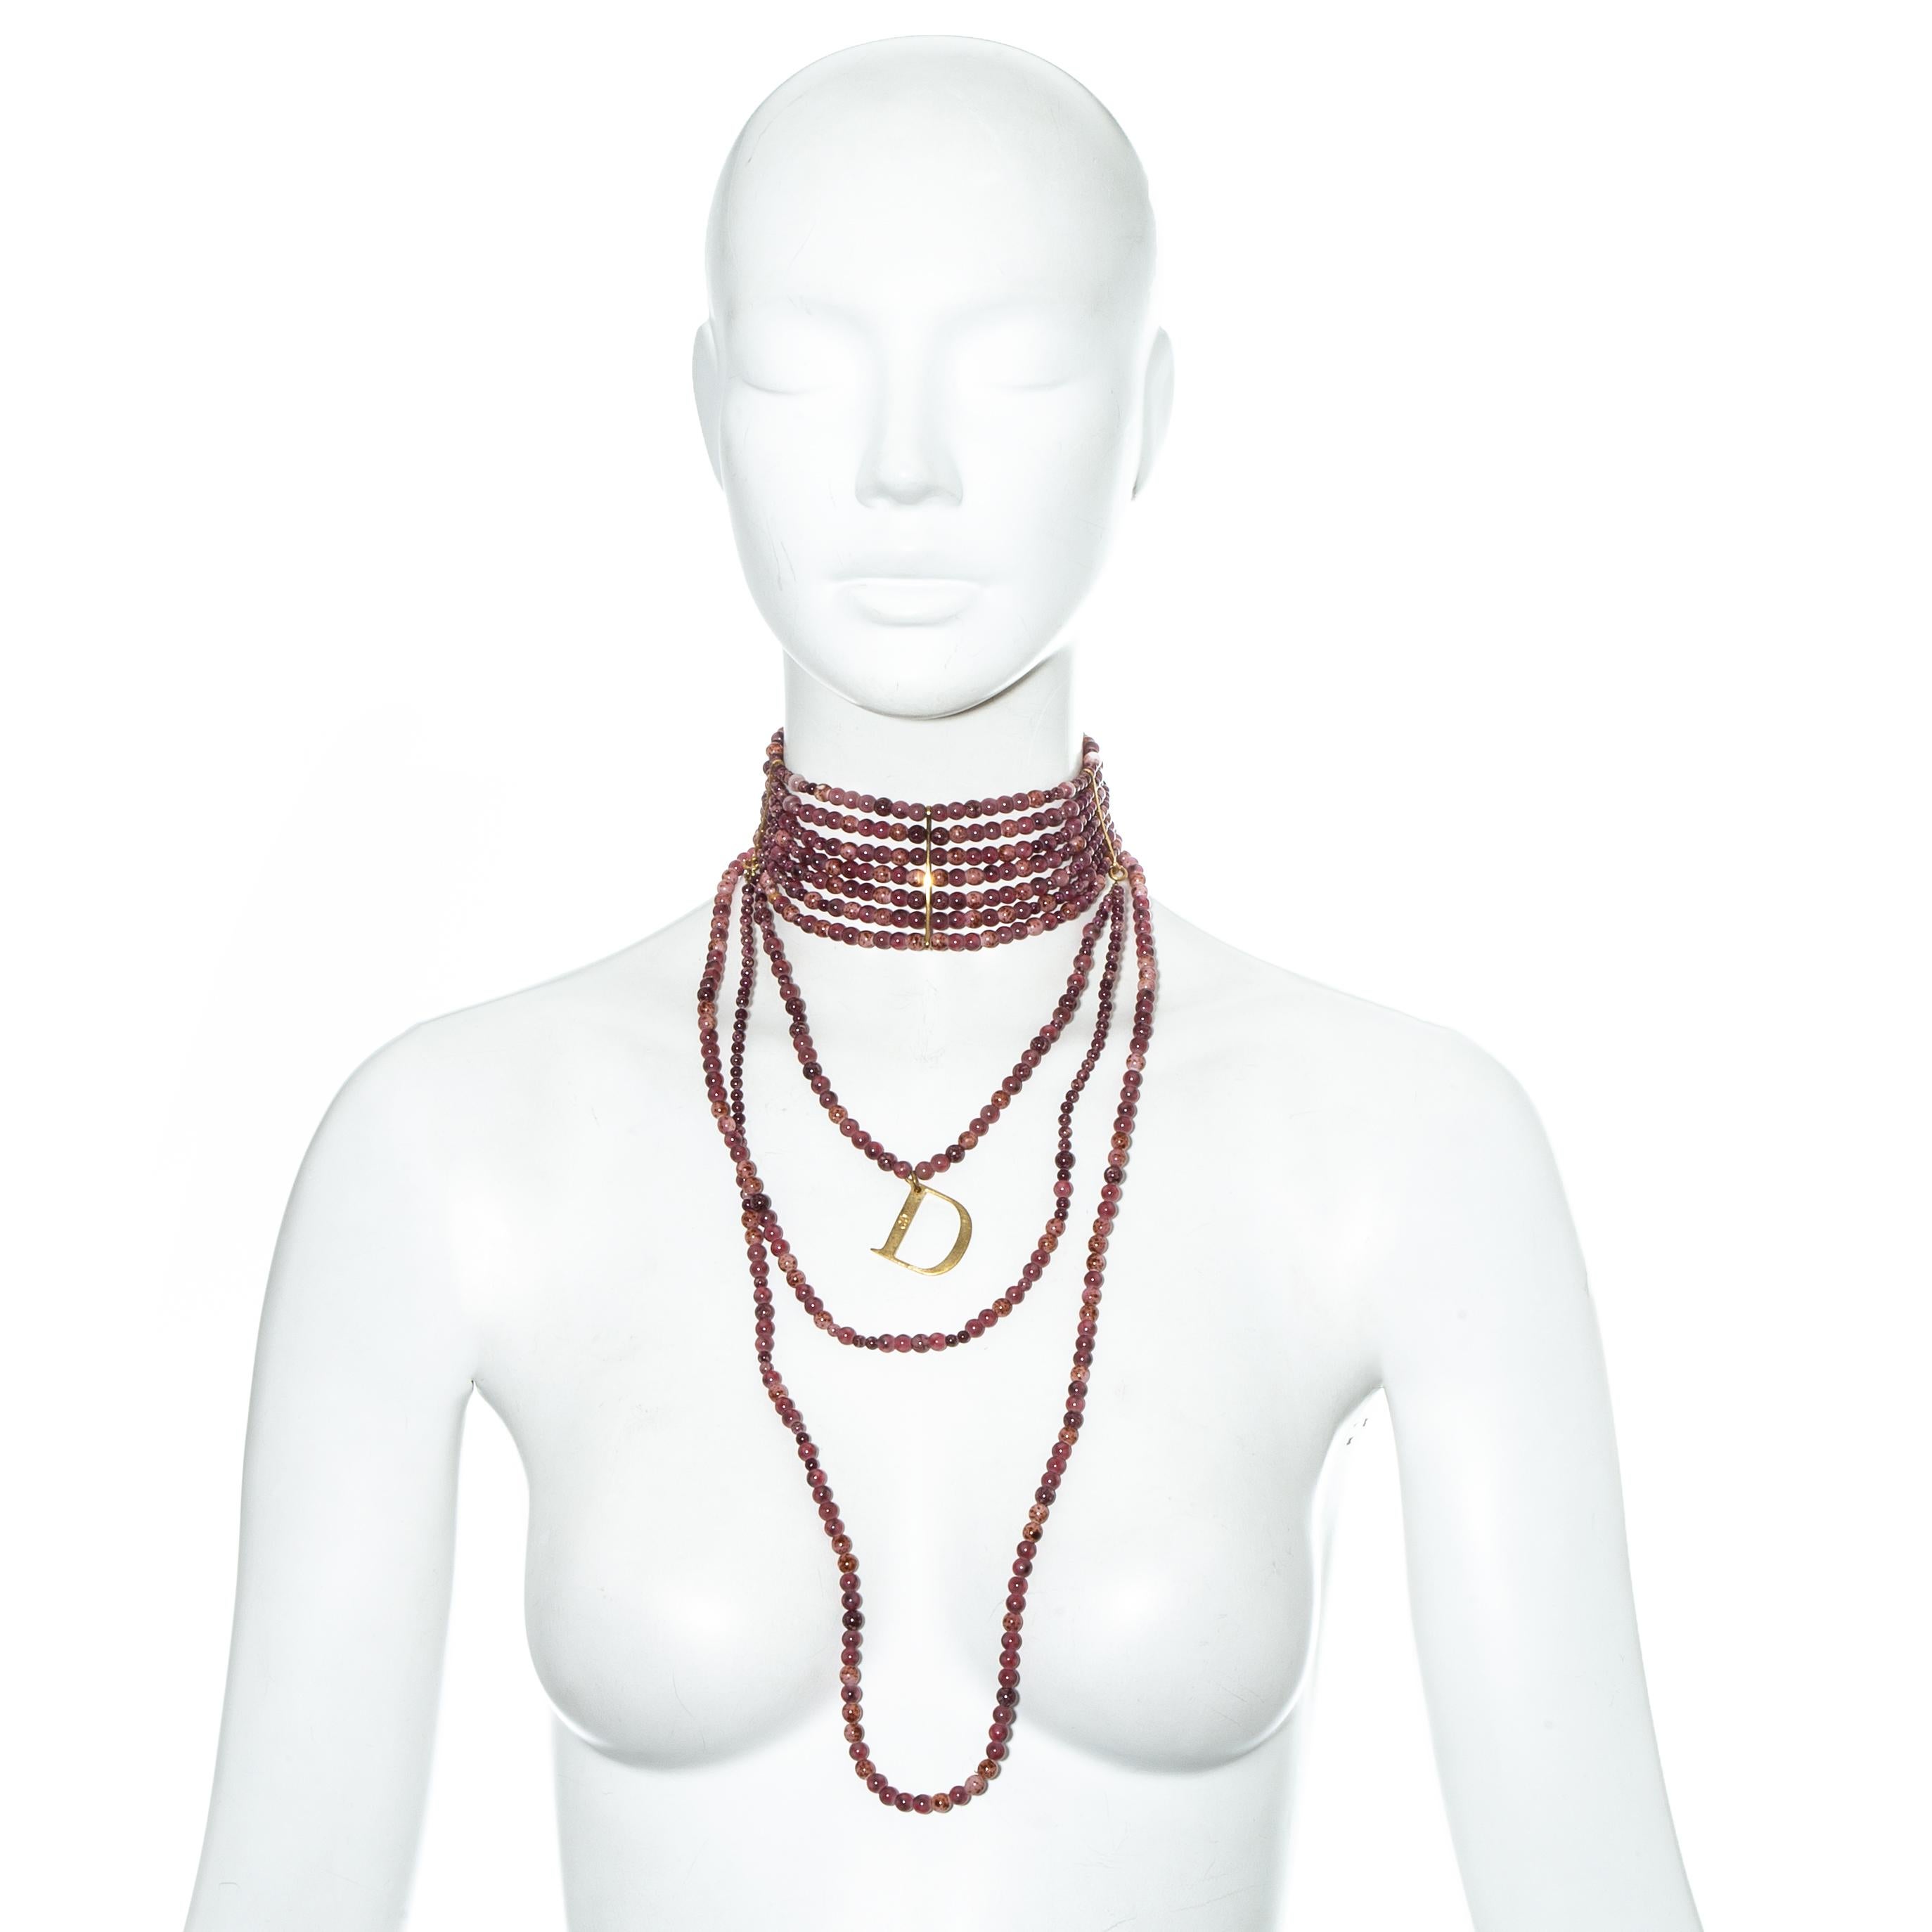 Christian Dior by John Galliano pink marble glass bead choker necklace, fw 1999 2